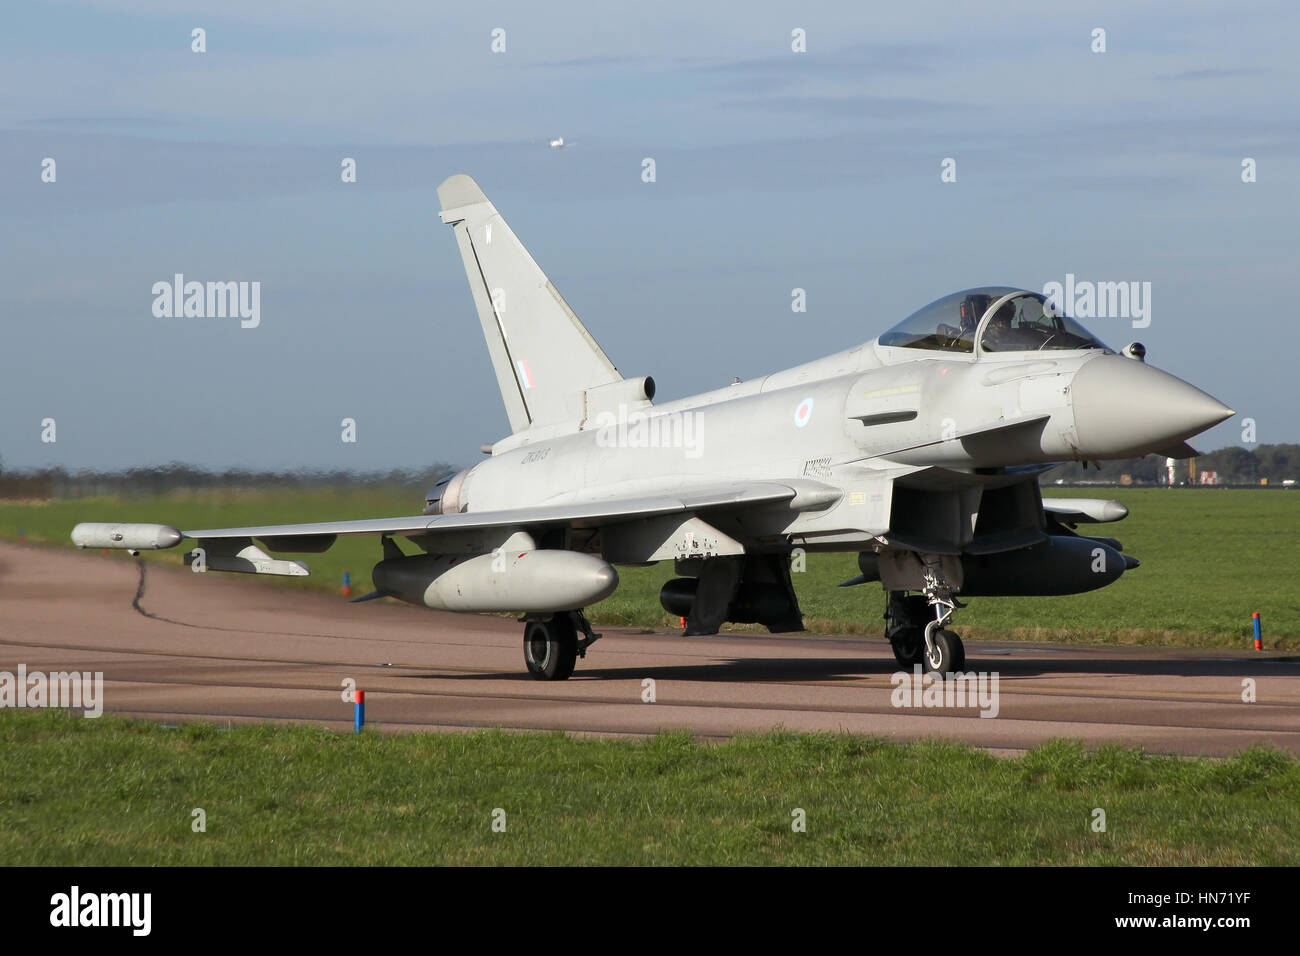 RAF Eurofighter Typhoon operated by 11 Sqn, RAF taxiing out from the shelters at Coningsby for departure as a Tutor overshoots the runway behind. Stock Photo